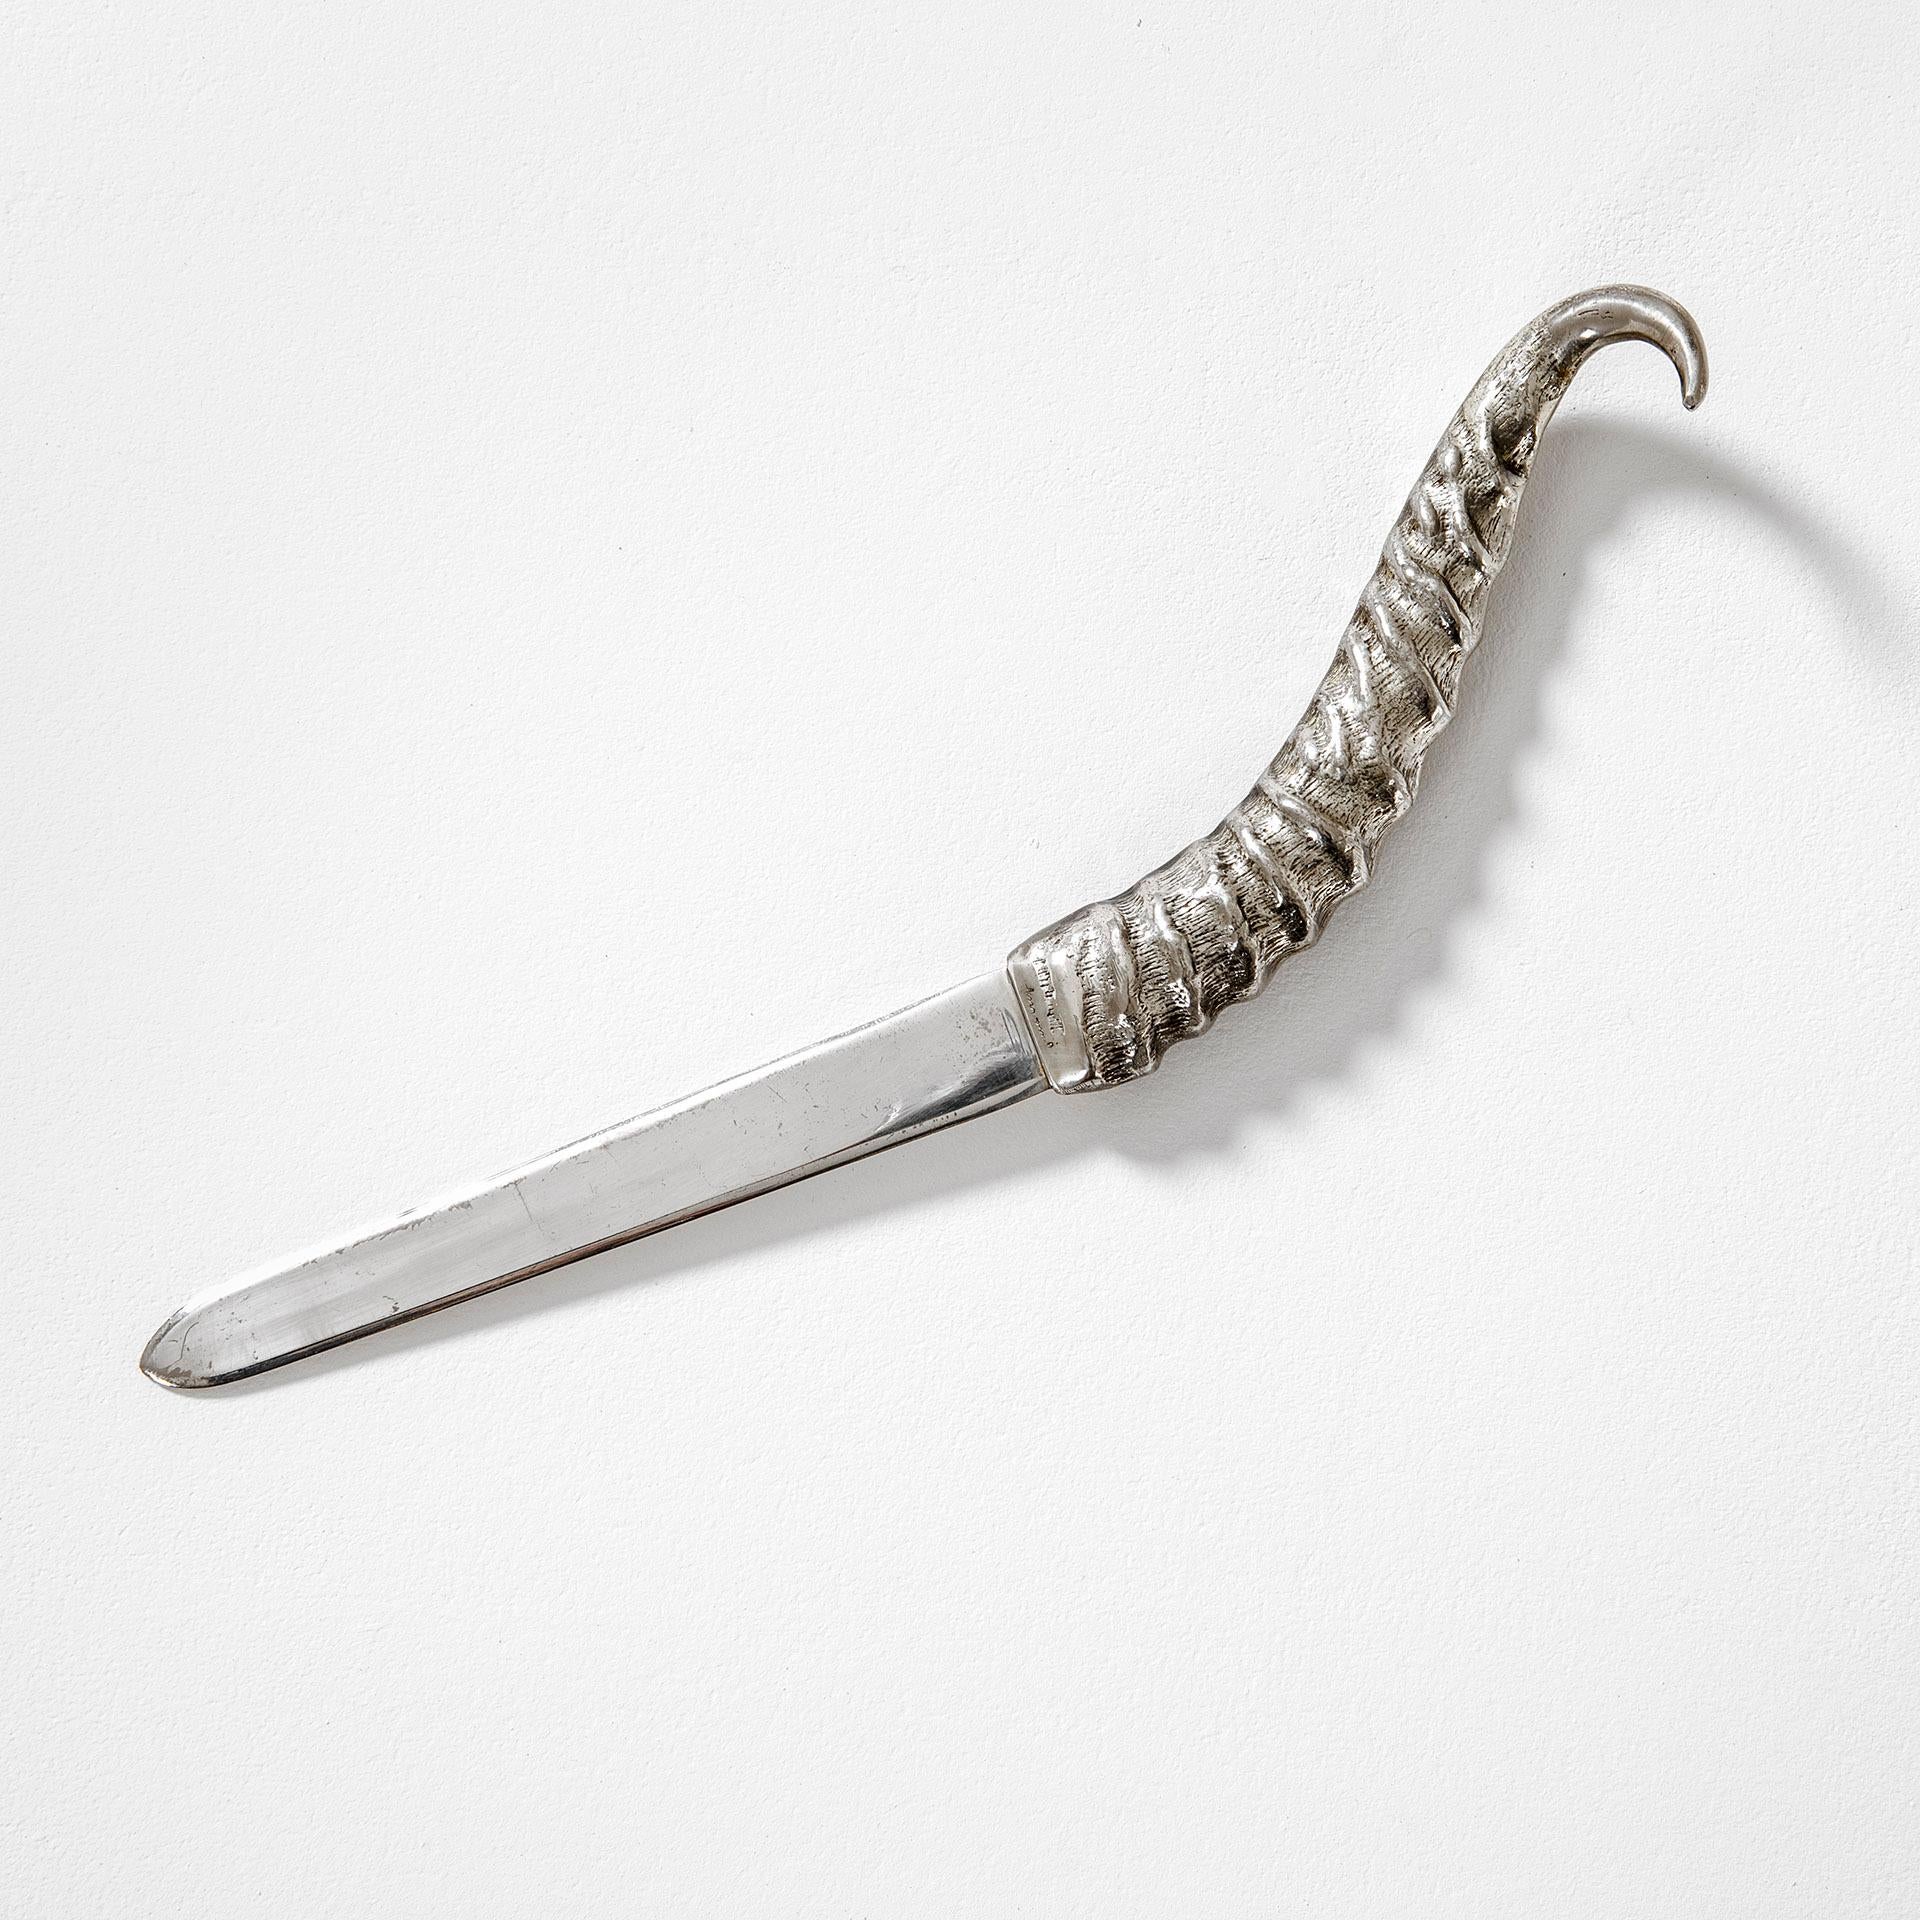 Very peculiar letter opener designed by Gabriella Crespi in '70s. The letter opener has a very beautiful handle in shape of seahorse, the object is in metal. There is the signature of the author as shown in photo.
This article is a great idea for a